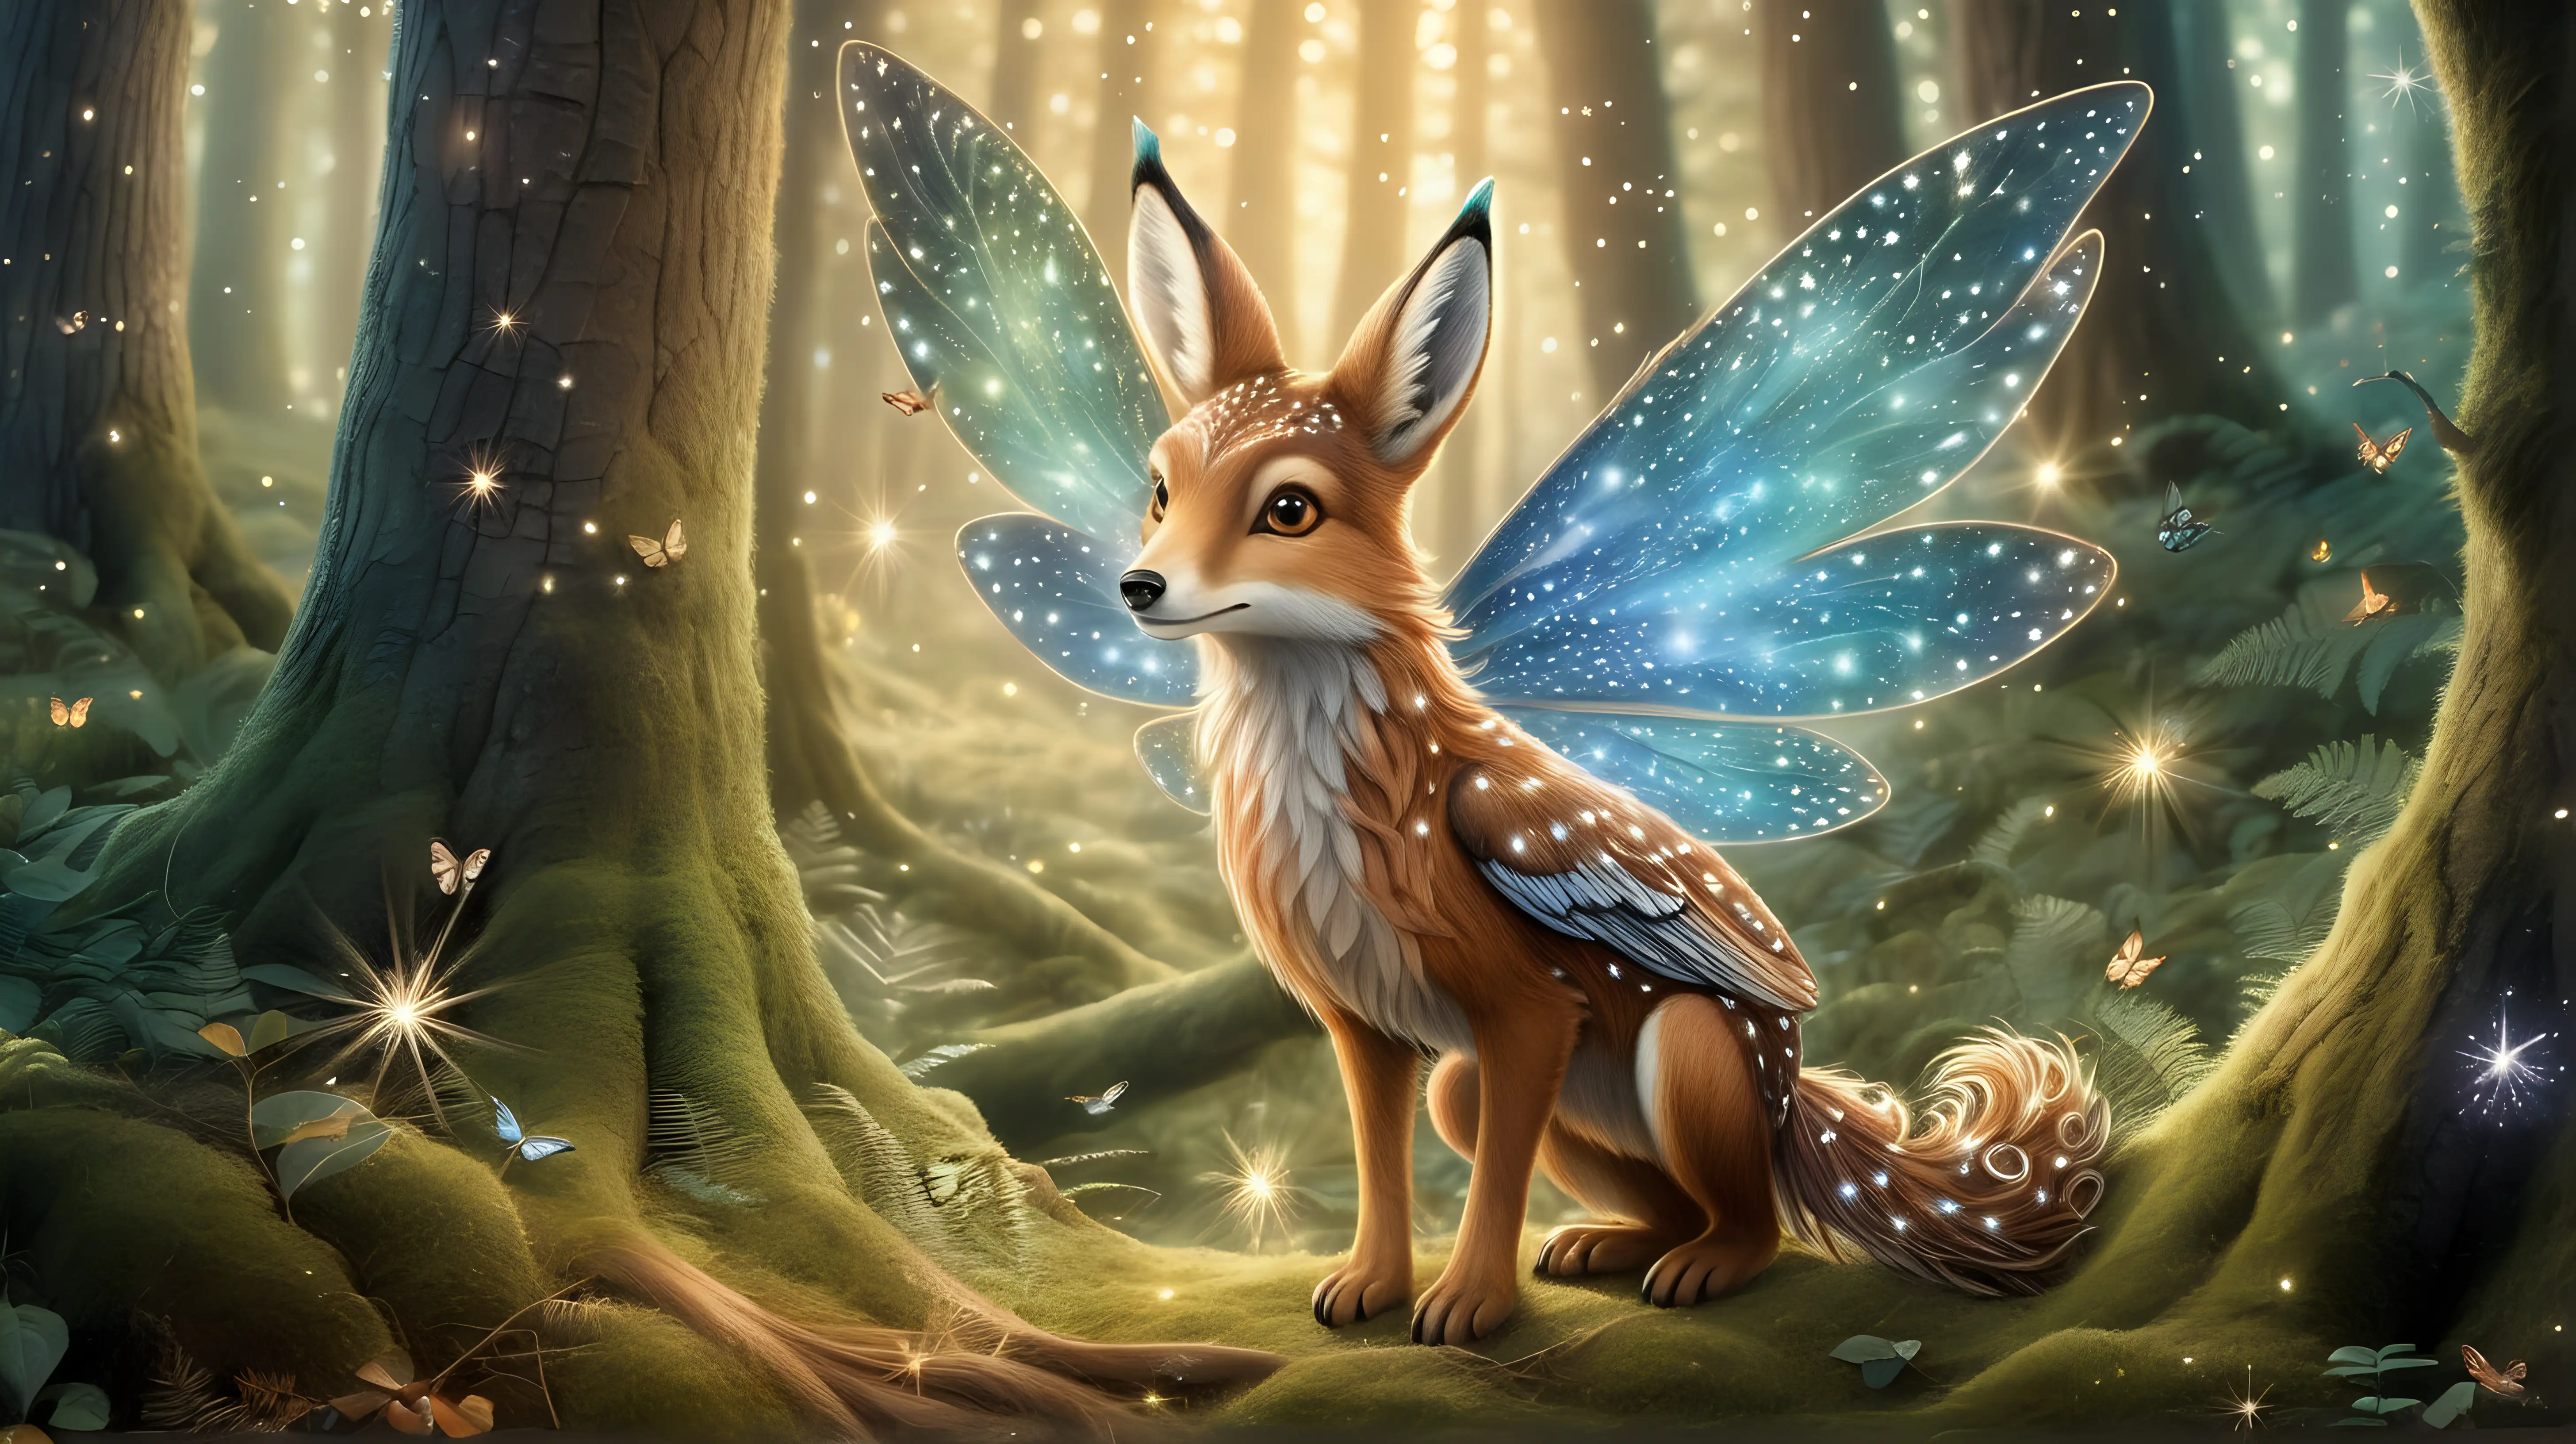 "Illustrate an enchanting forest creature with wings that leave behind a trail of twinkling stardust, spreading magic and charm throughout the woodland."